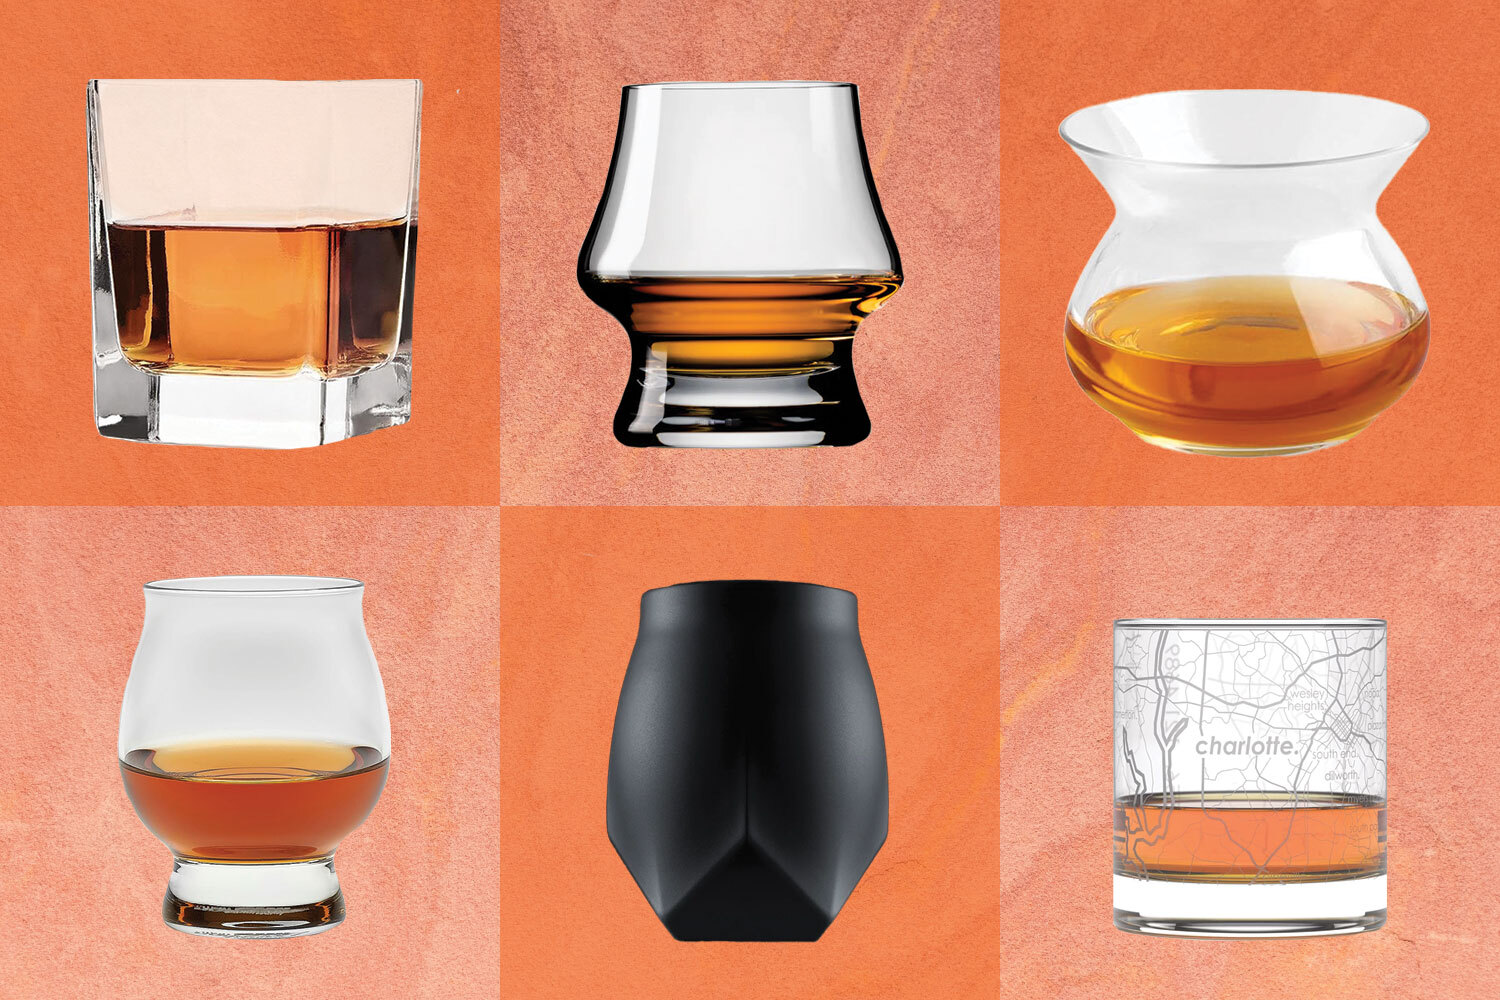 Types of Drinking Glasses and Their Uses